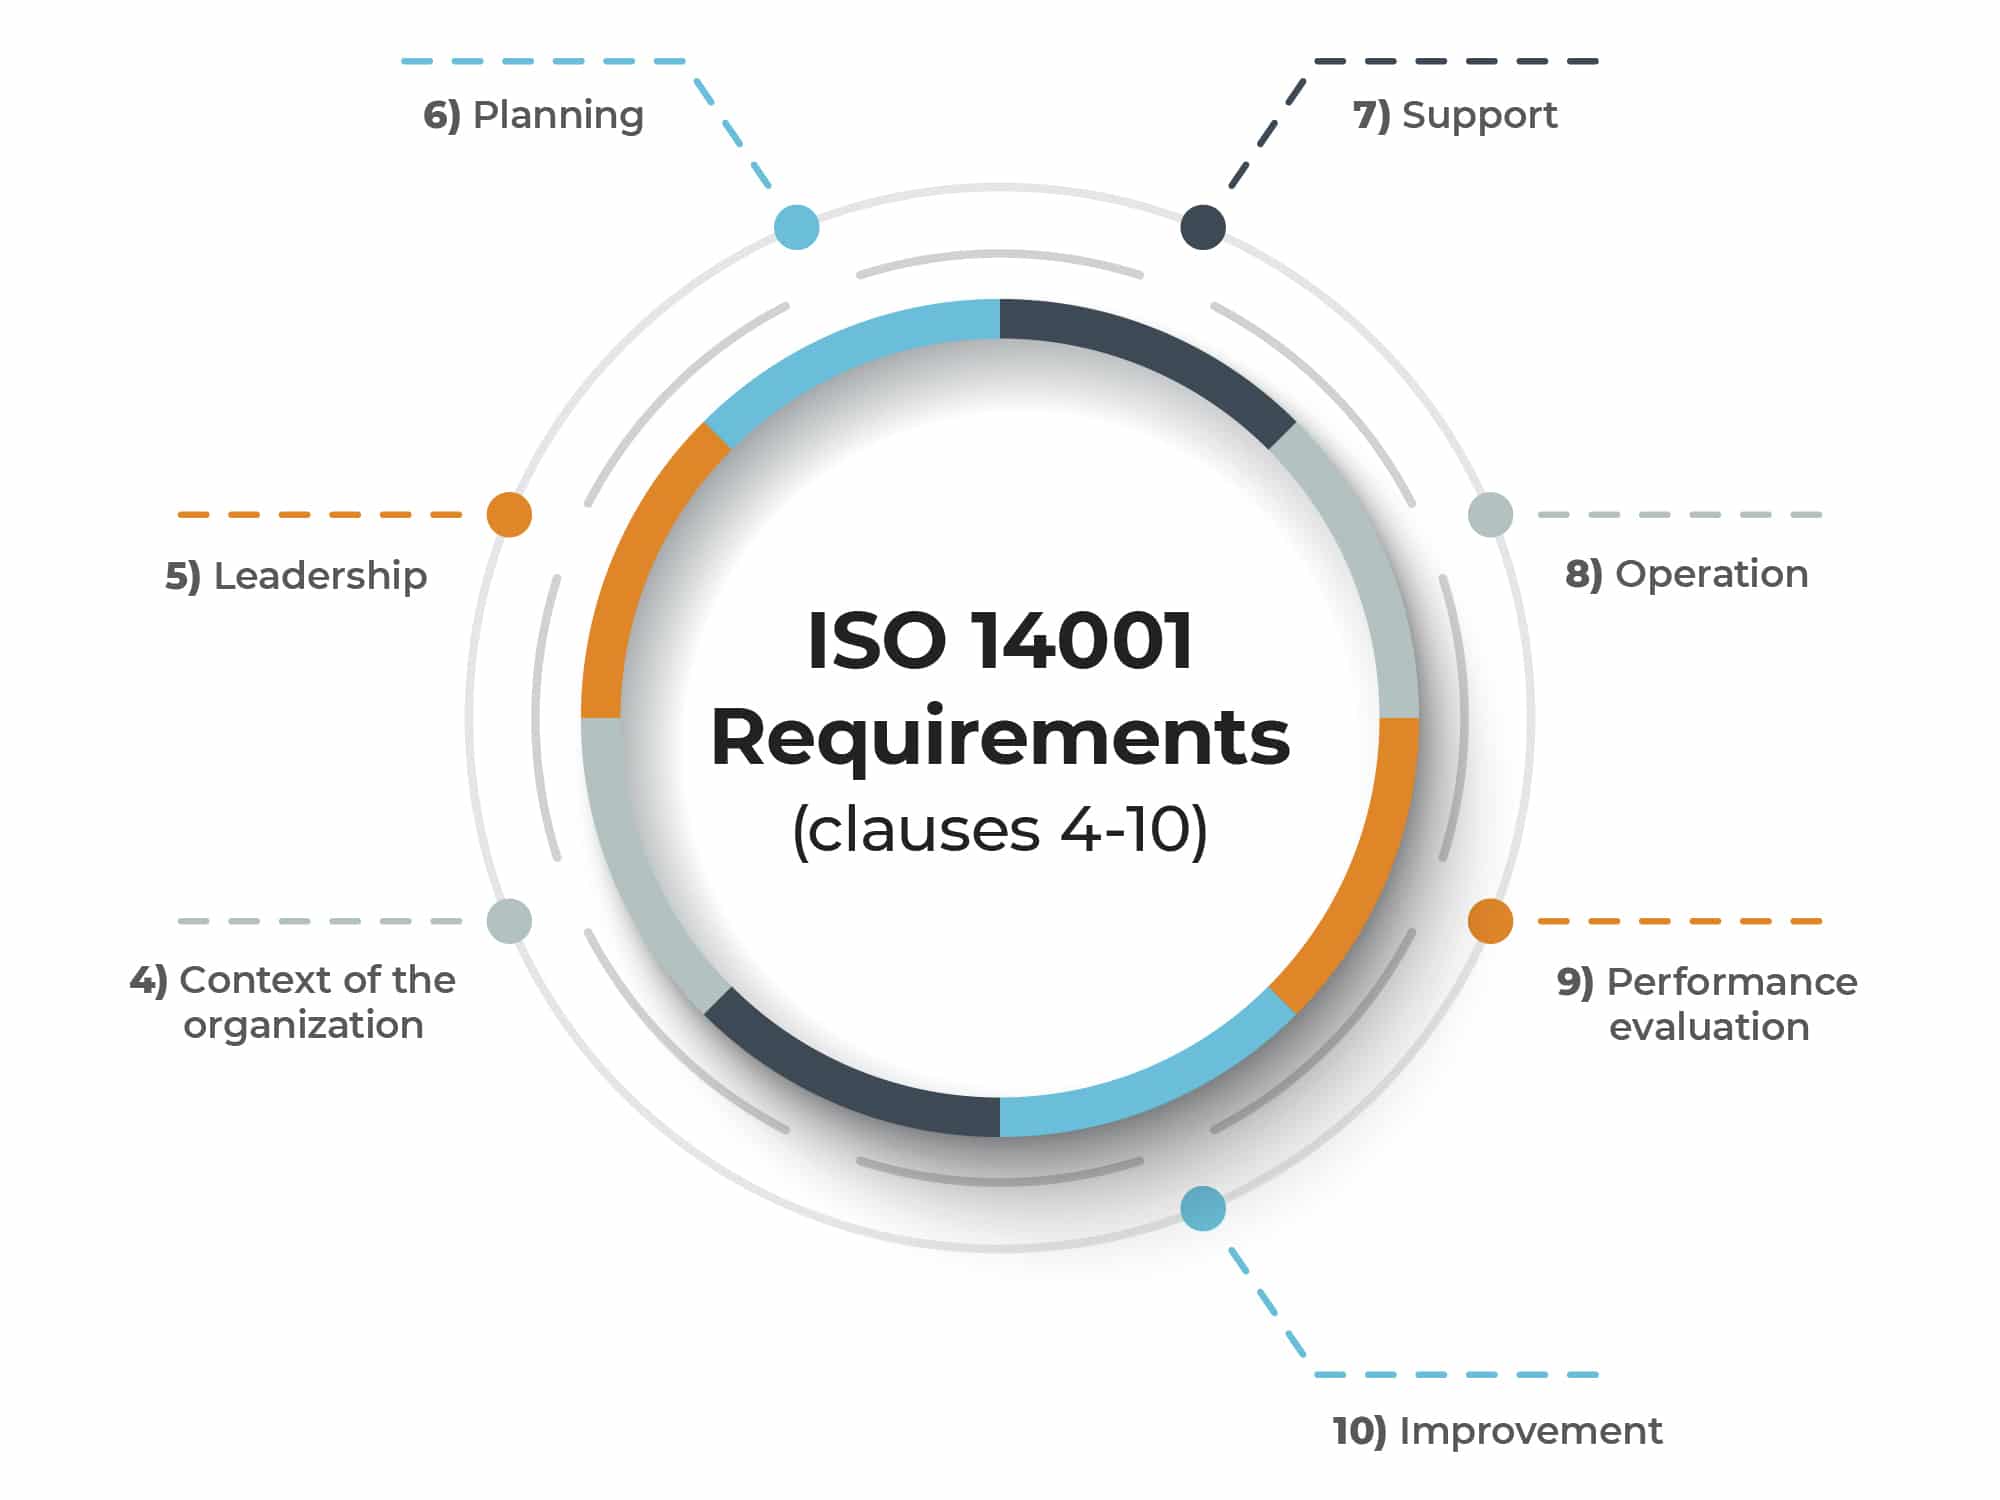 ISO 14001 Requirements and Structure